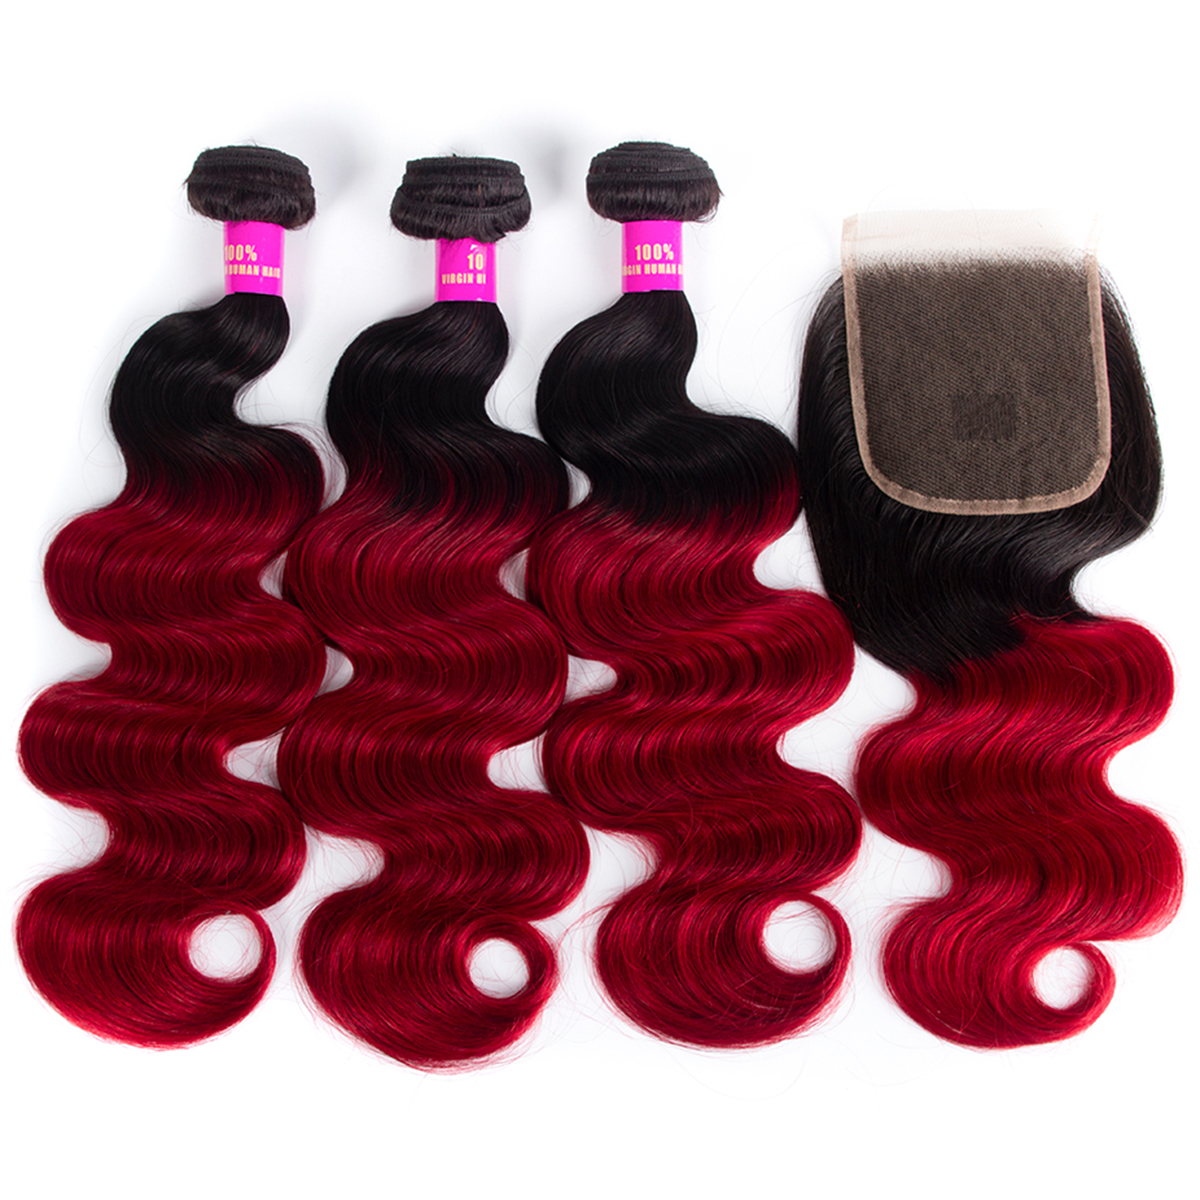 1B Red Ombre Hair Brazilian Body Wave 3 Bundles With Closure